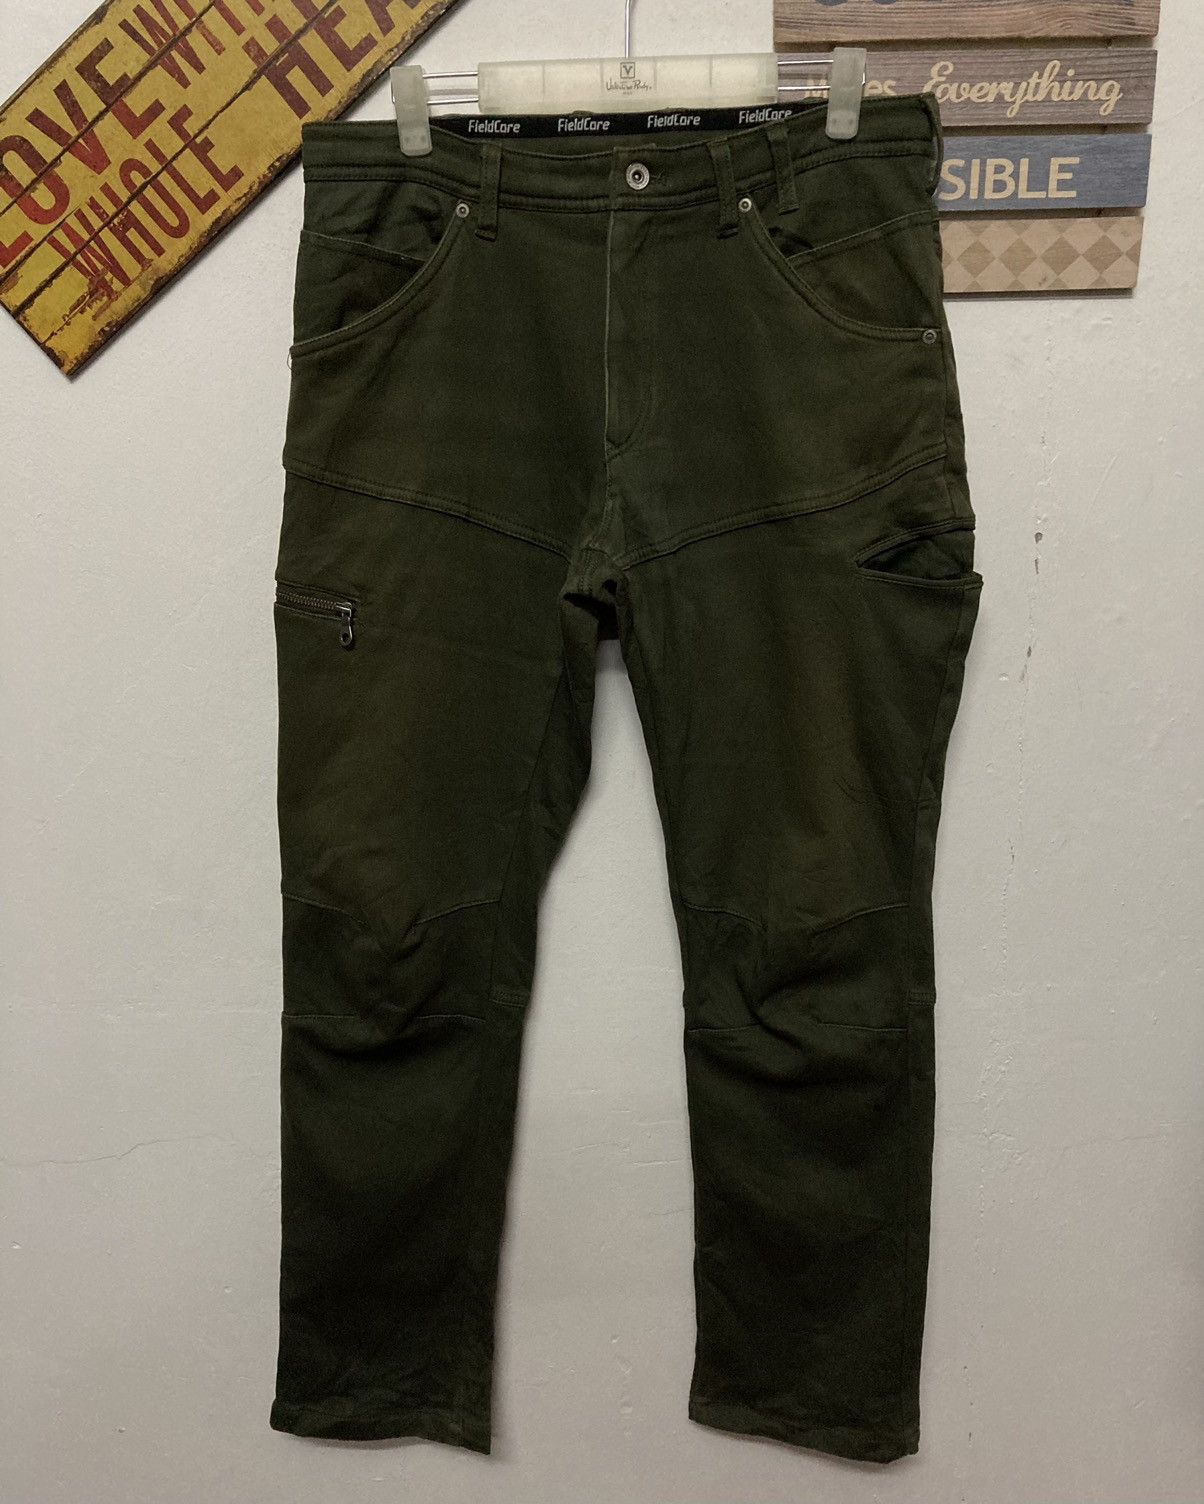 Vintage - Fieldcore Tactical Outdoor Thermal Pants - 1